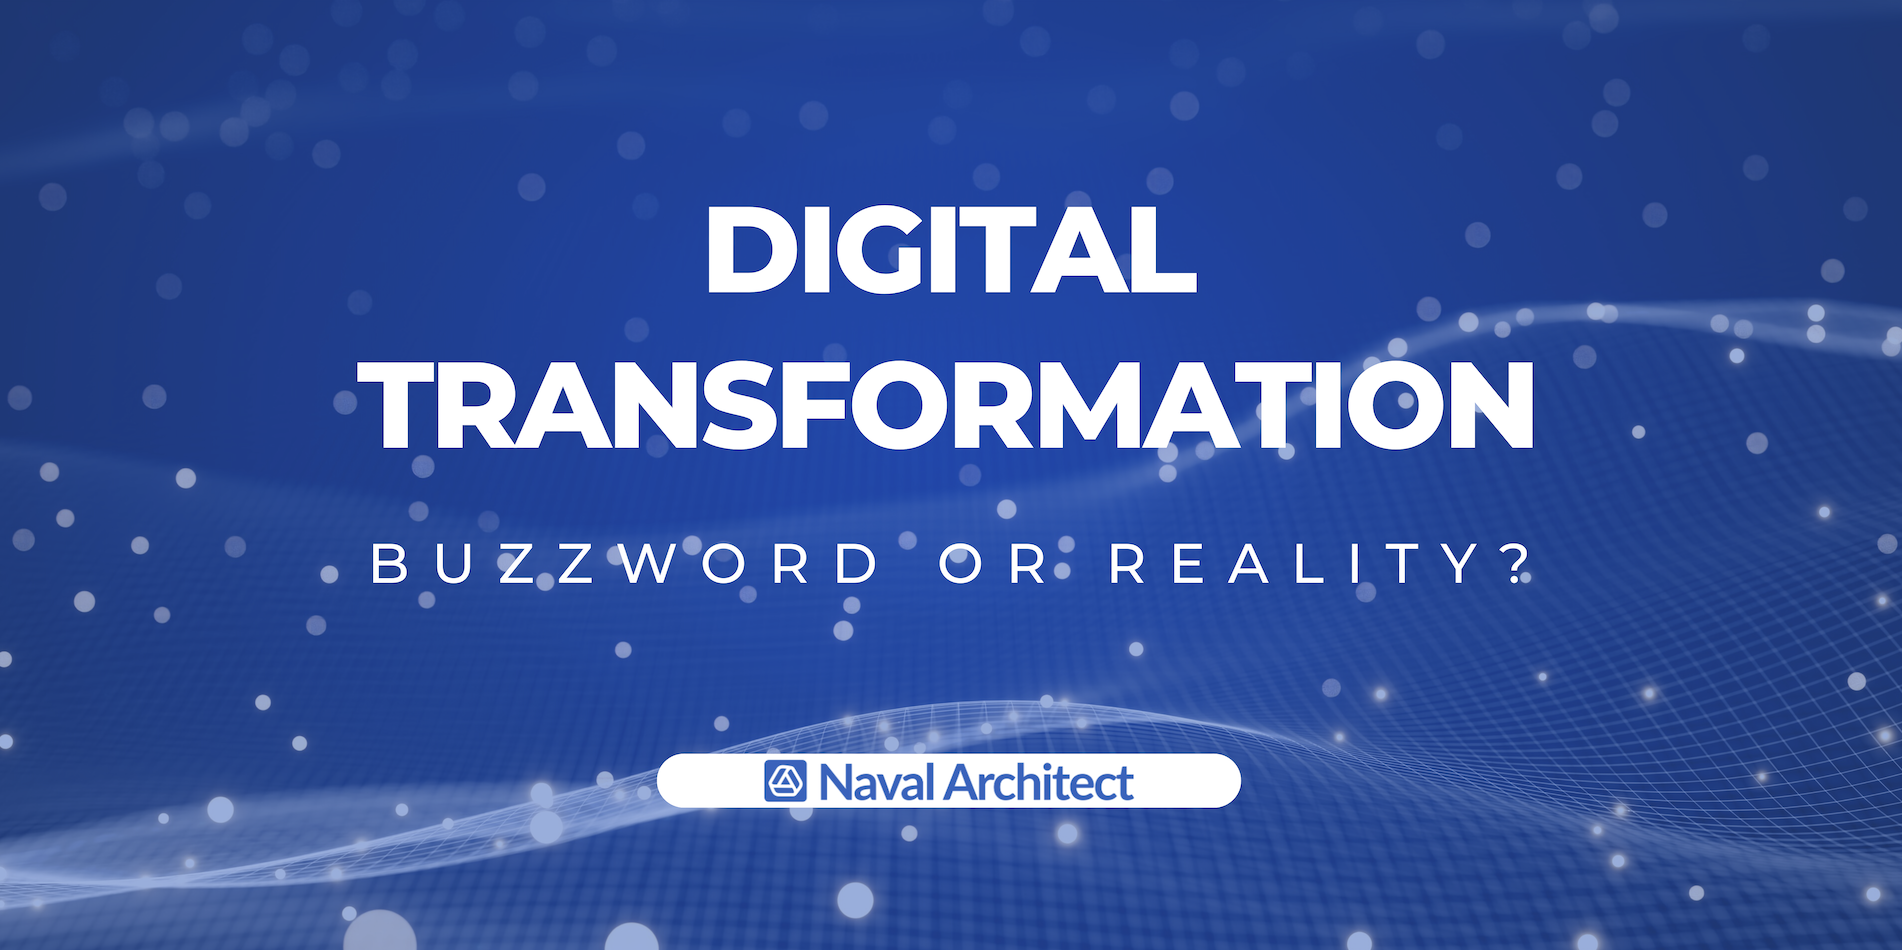 Digital Transformation in maritime industry: Buzzword or Reality?